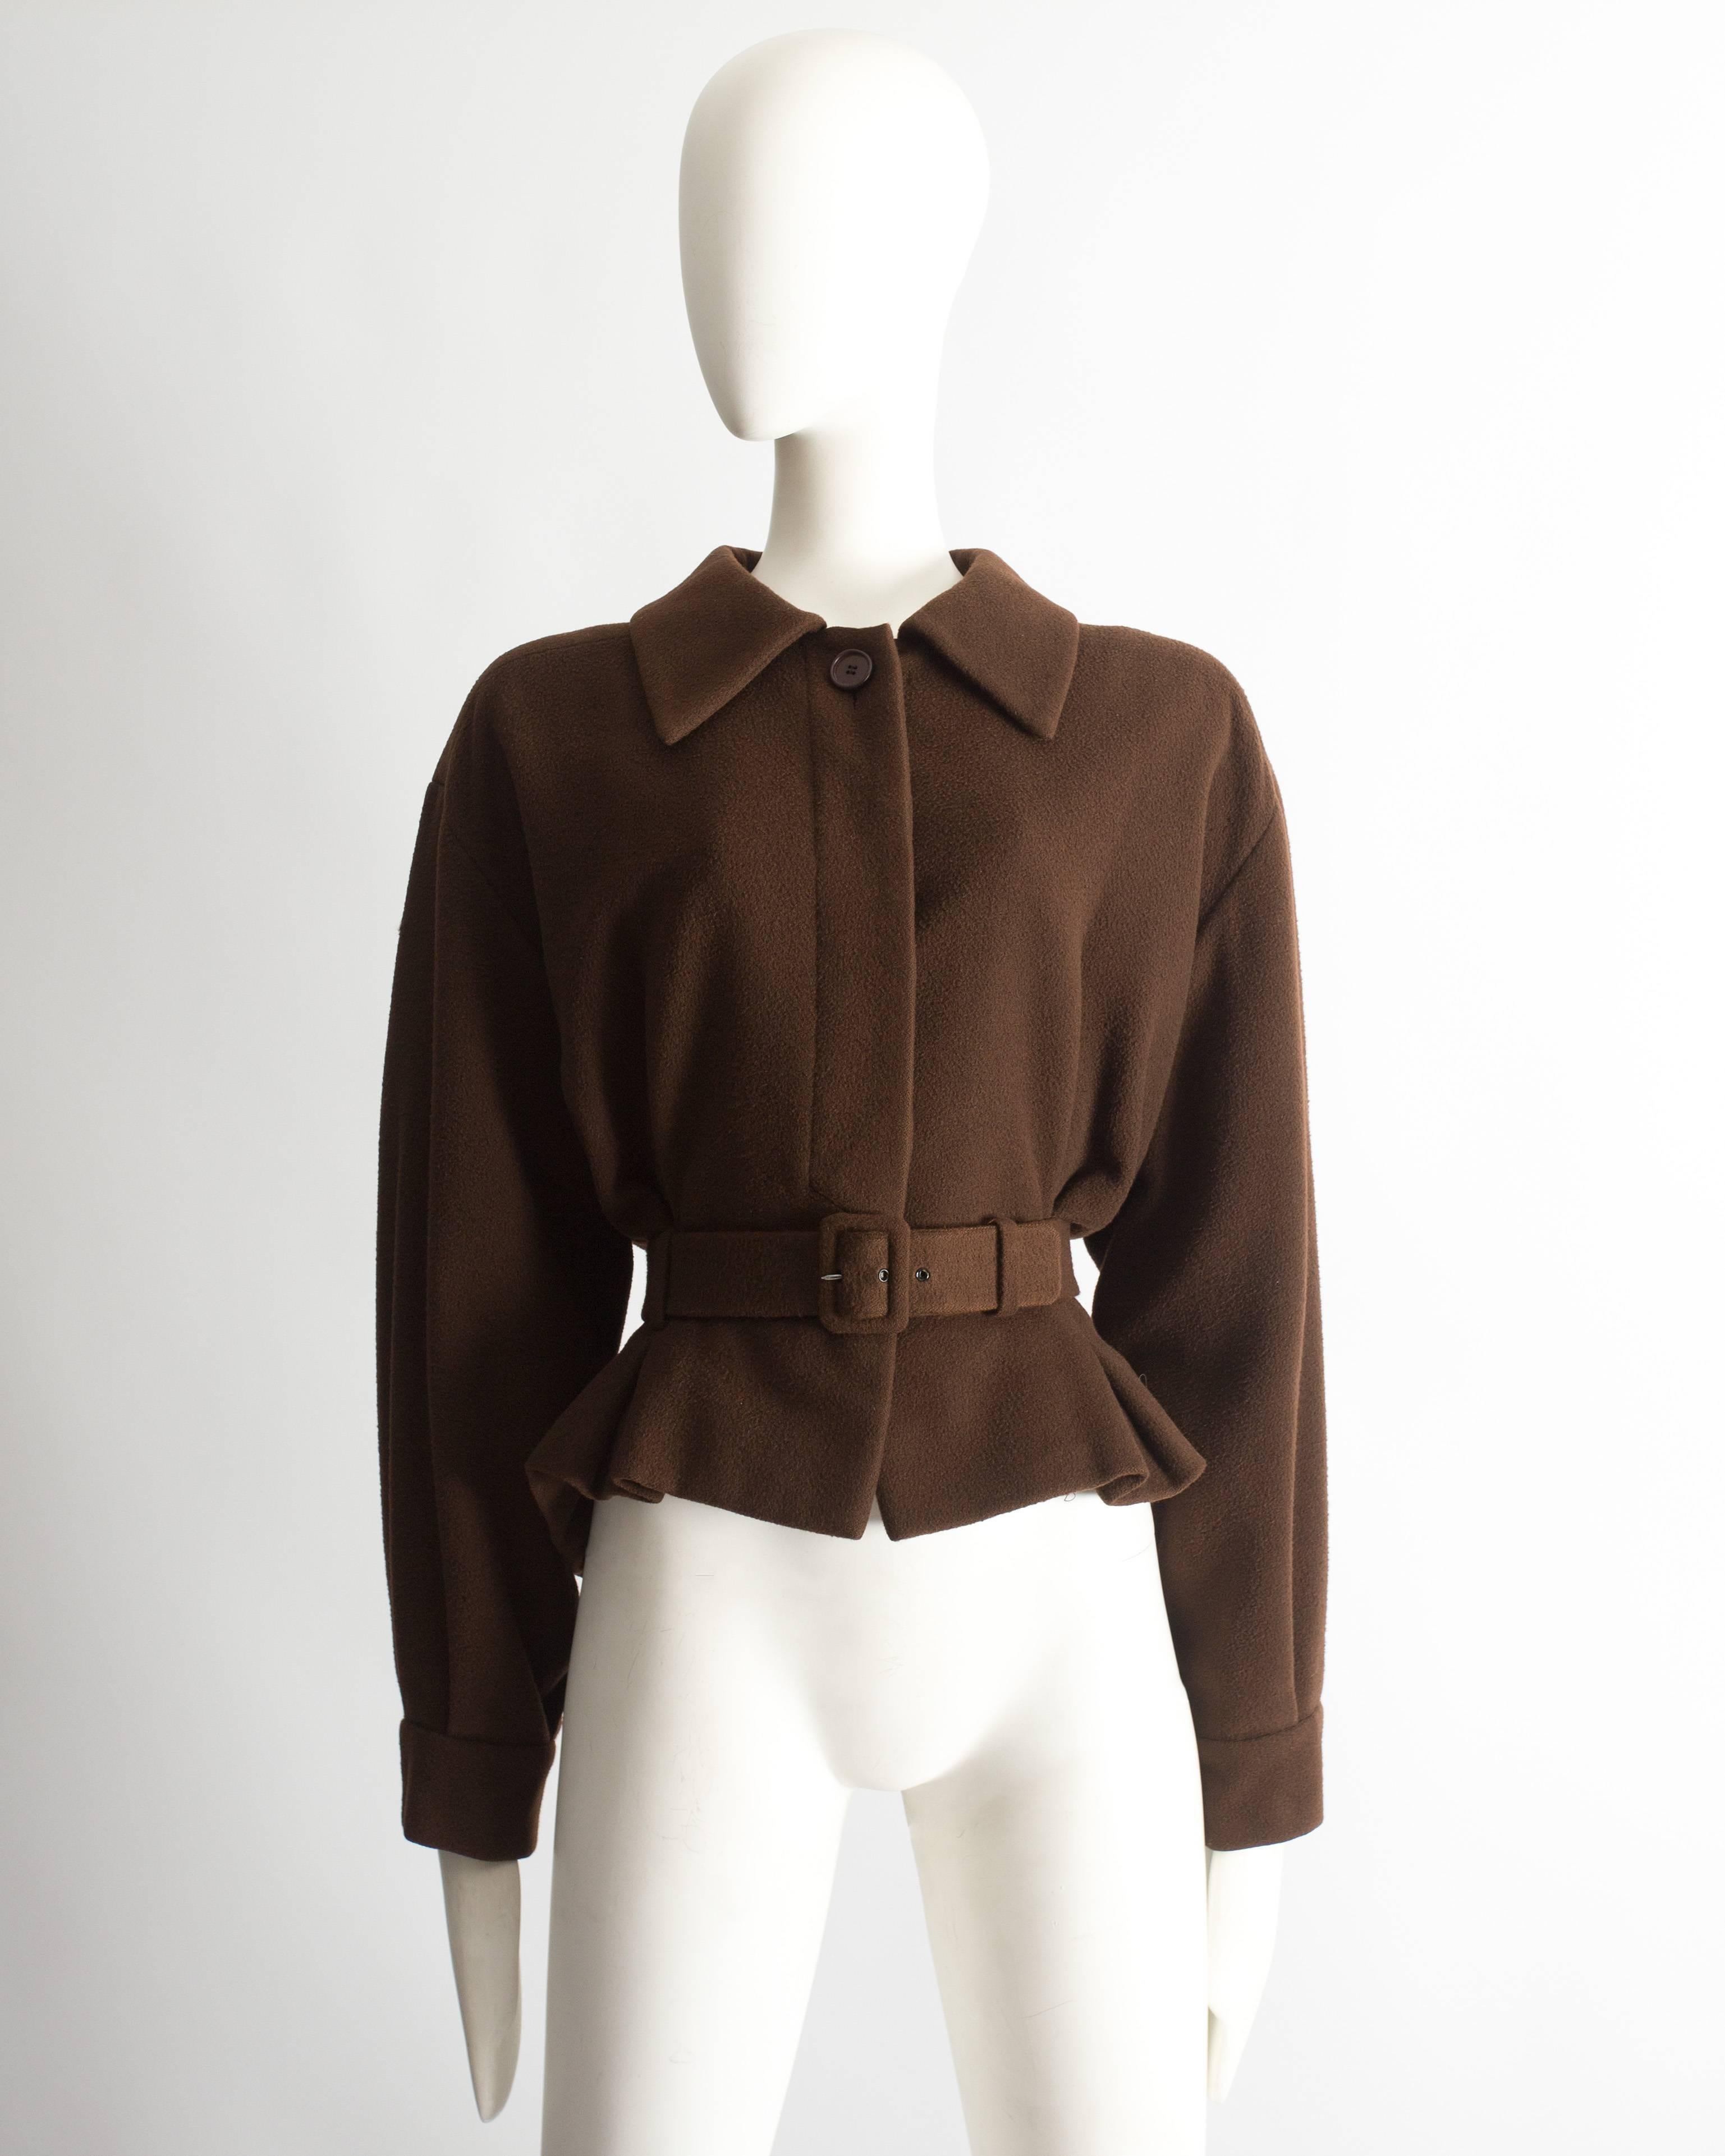 Christian Dior Haute Couture brown cashmere and wool jacket from the Autumn-Winter 1988 collection. Silk lining, pointed collar, matching belt with leather backing and, hidden button closures at the front. 